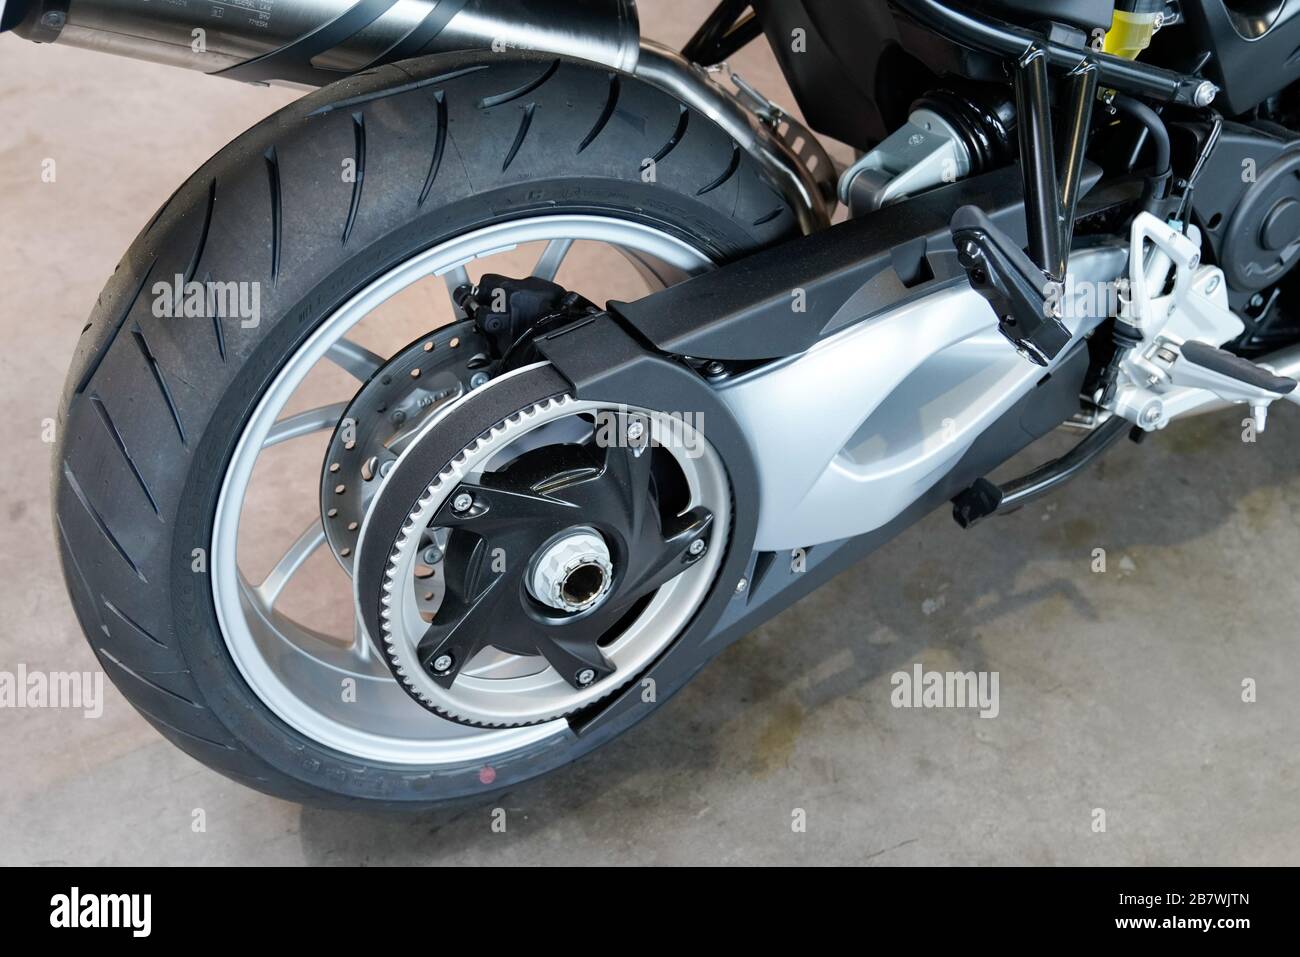 Bordeaux , Aquitaine / France - 03 07 2020 : rear wheel of a new bmw  motorcycle with belt transmission in Motorrad motorbike dealership  motorcycle Stock Photo - Alamy